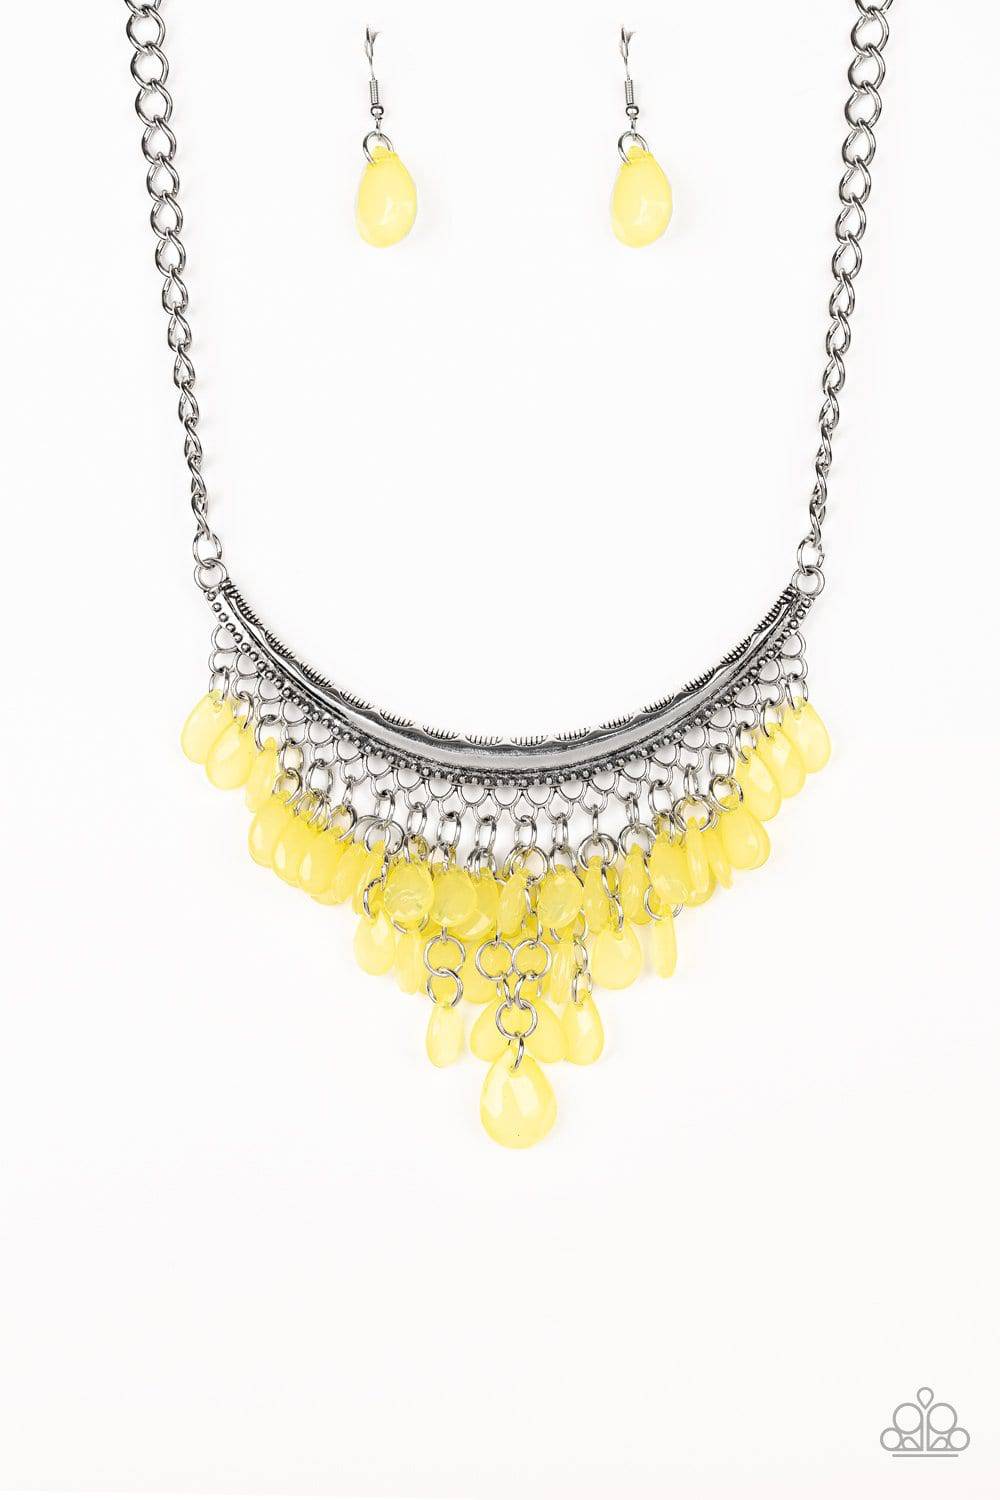 A359 - Rio Rainfall Yellow Necklace by Paparazzi Accessories on Fancy5Fashion.com